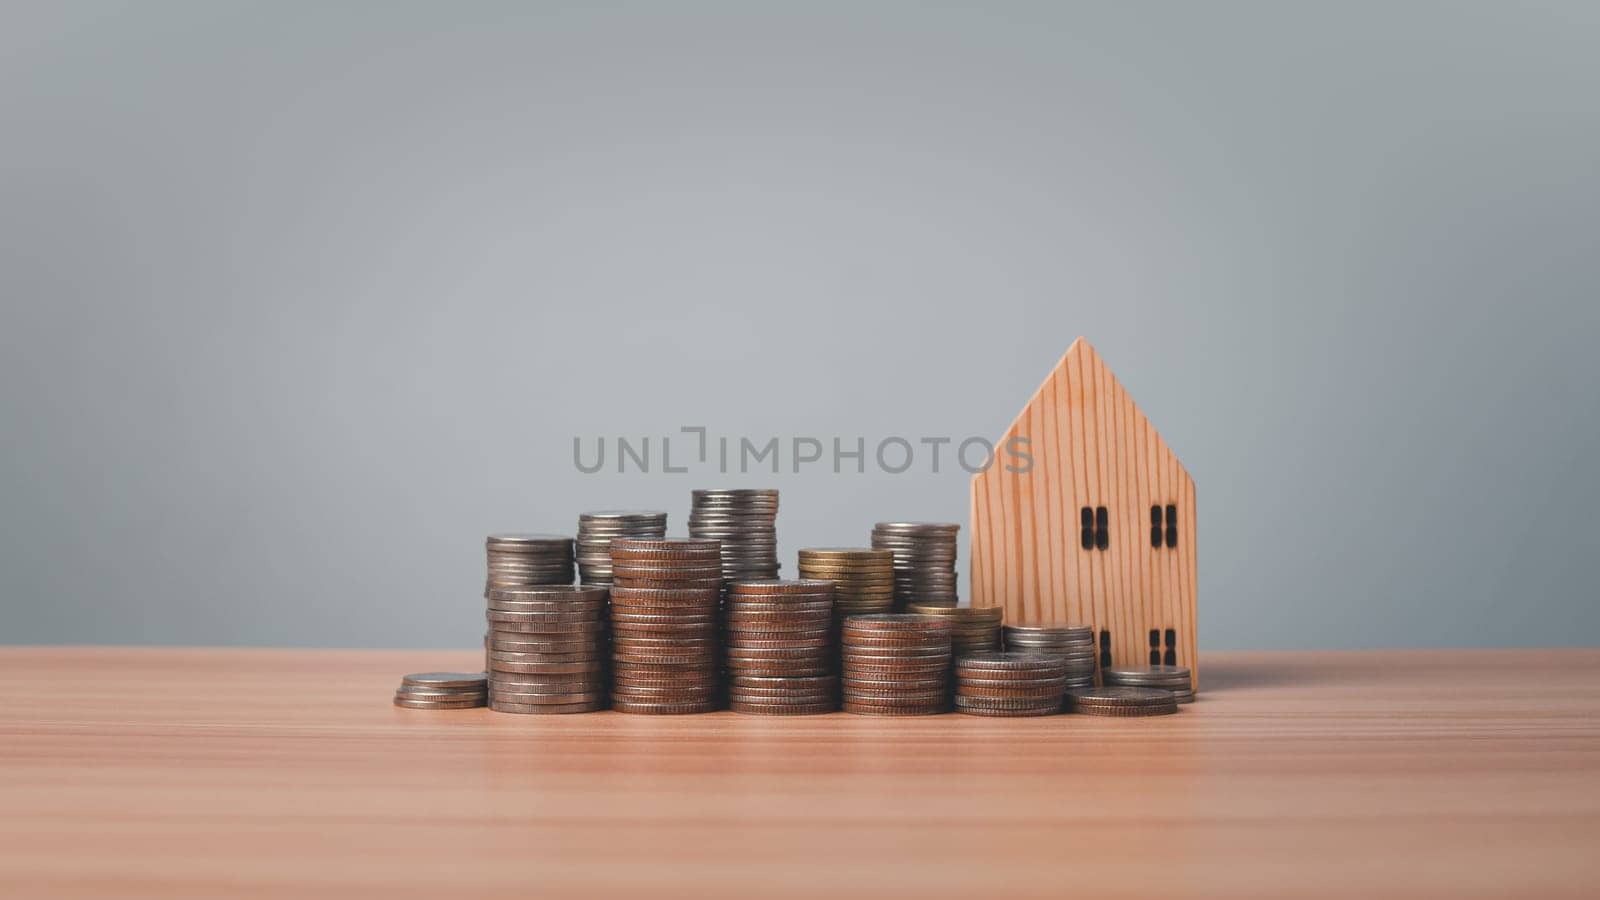 Model wooden house and coins lined up on wooden floor on white background. Concepts of finance, savings and investment. Real estate concepts. by Unimages2527